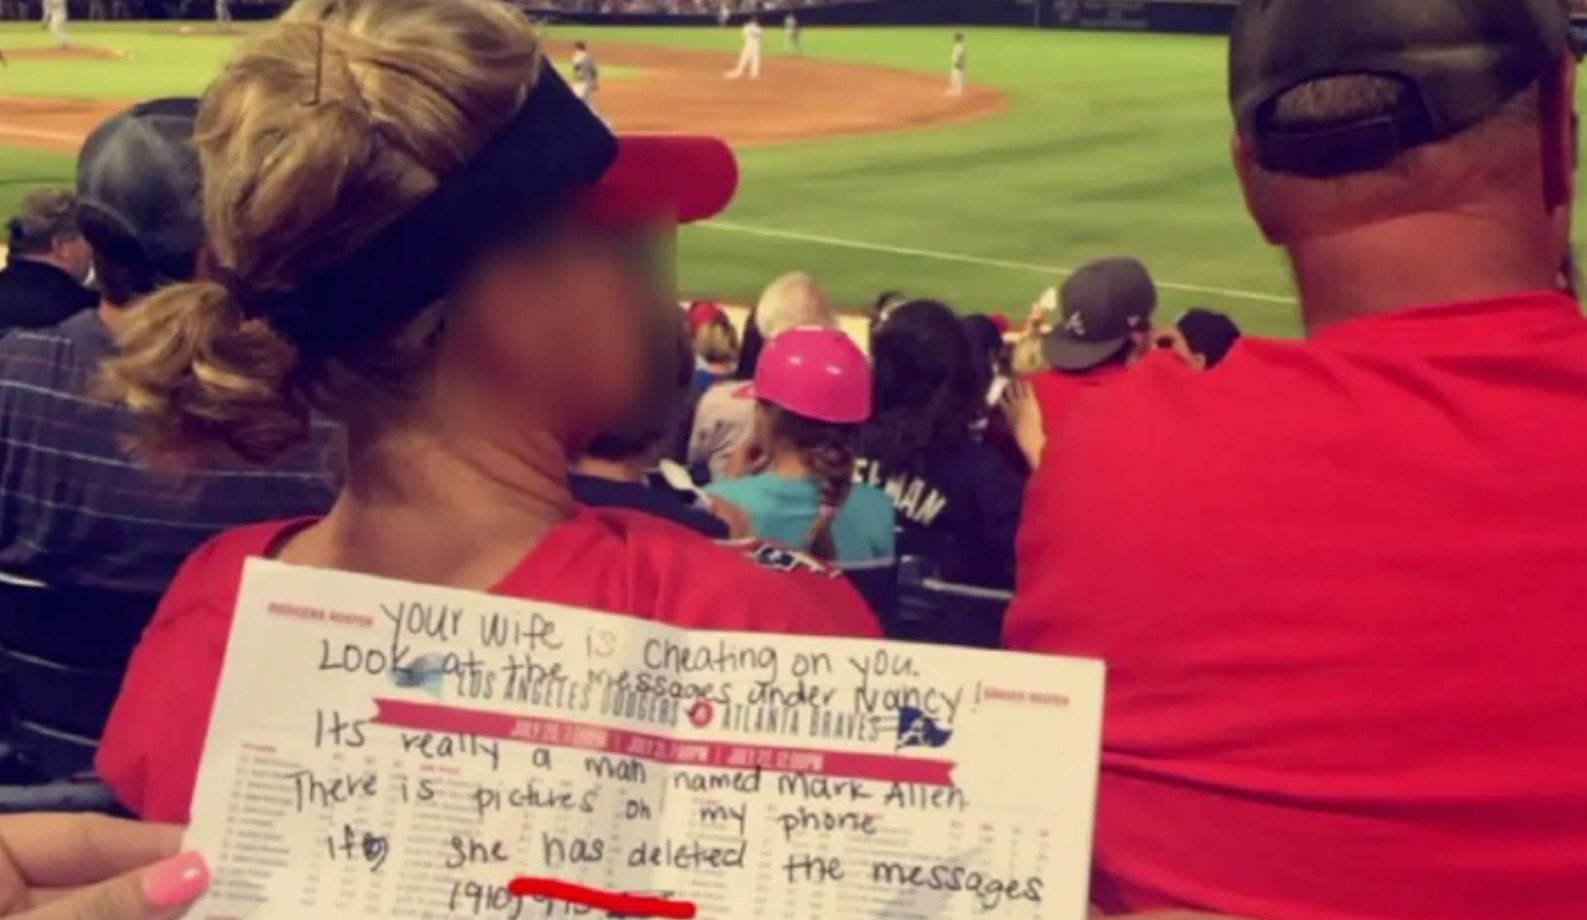 Cheating Wife Reportedly Busted While Sexting At A Baseball Game HuffPost Sports